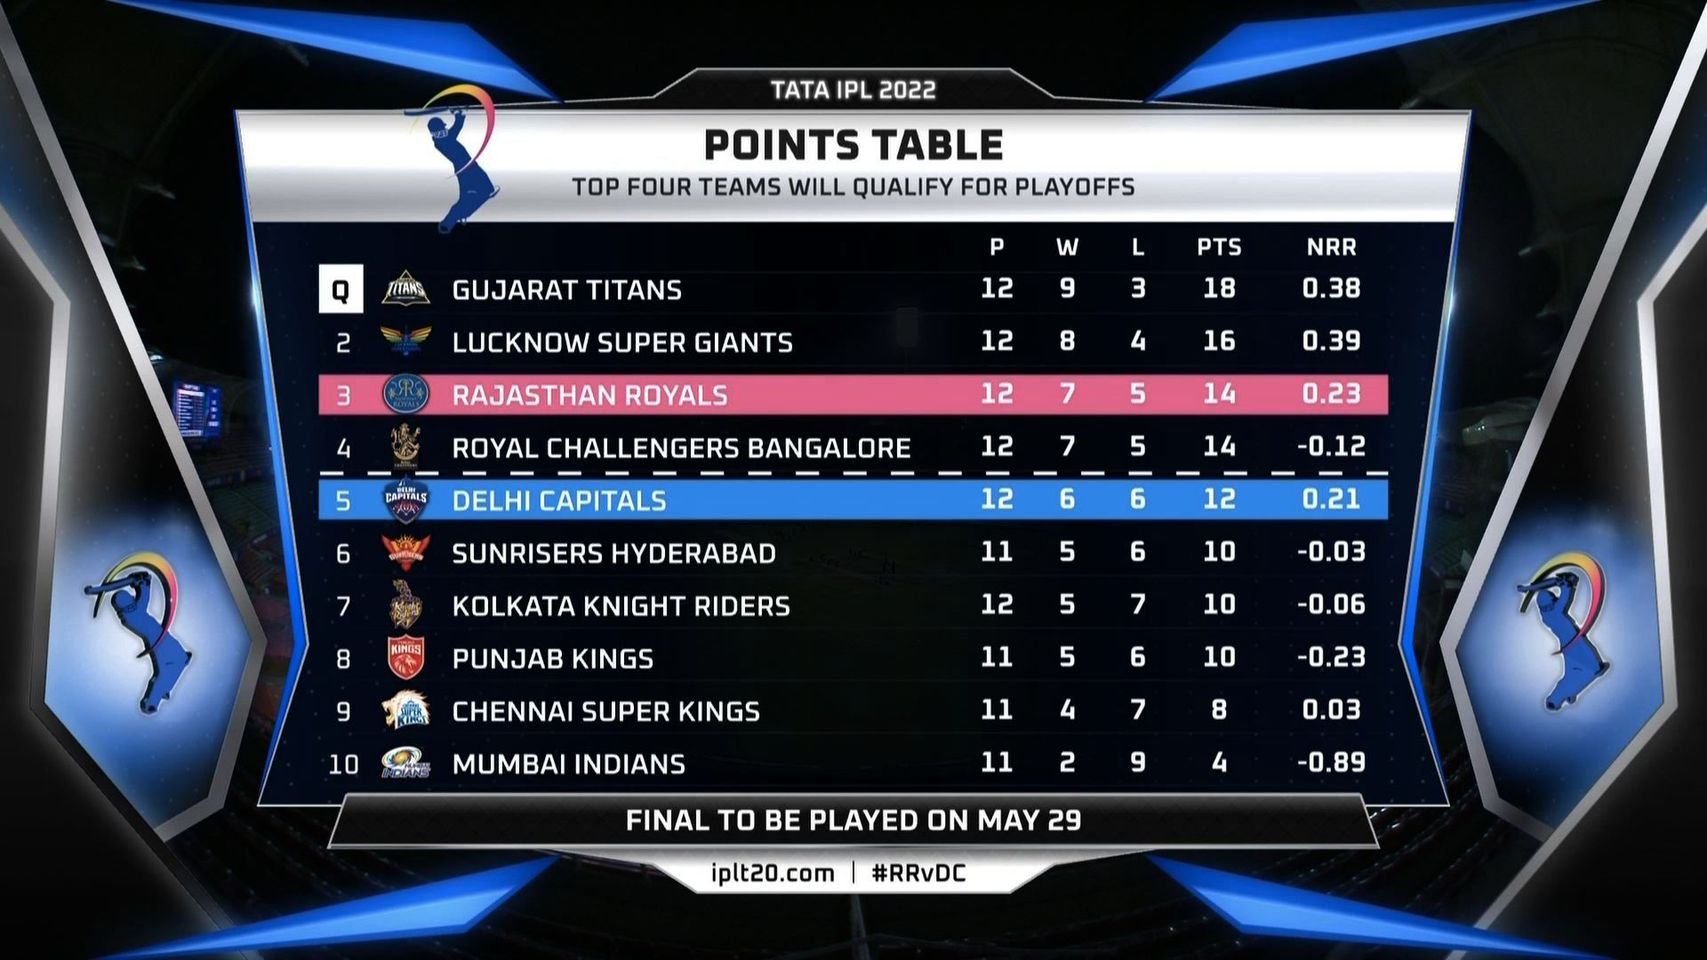 IPL 2022 POINT TABLE 12 MAY